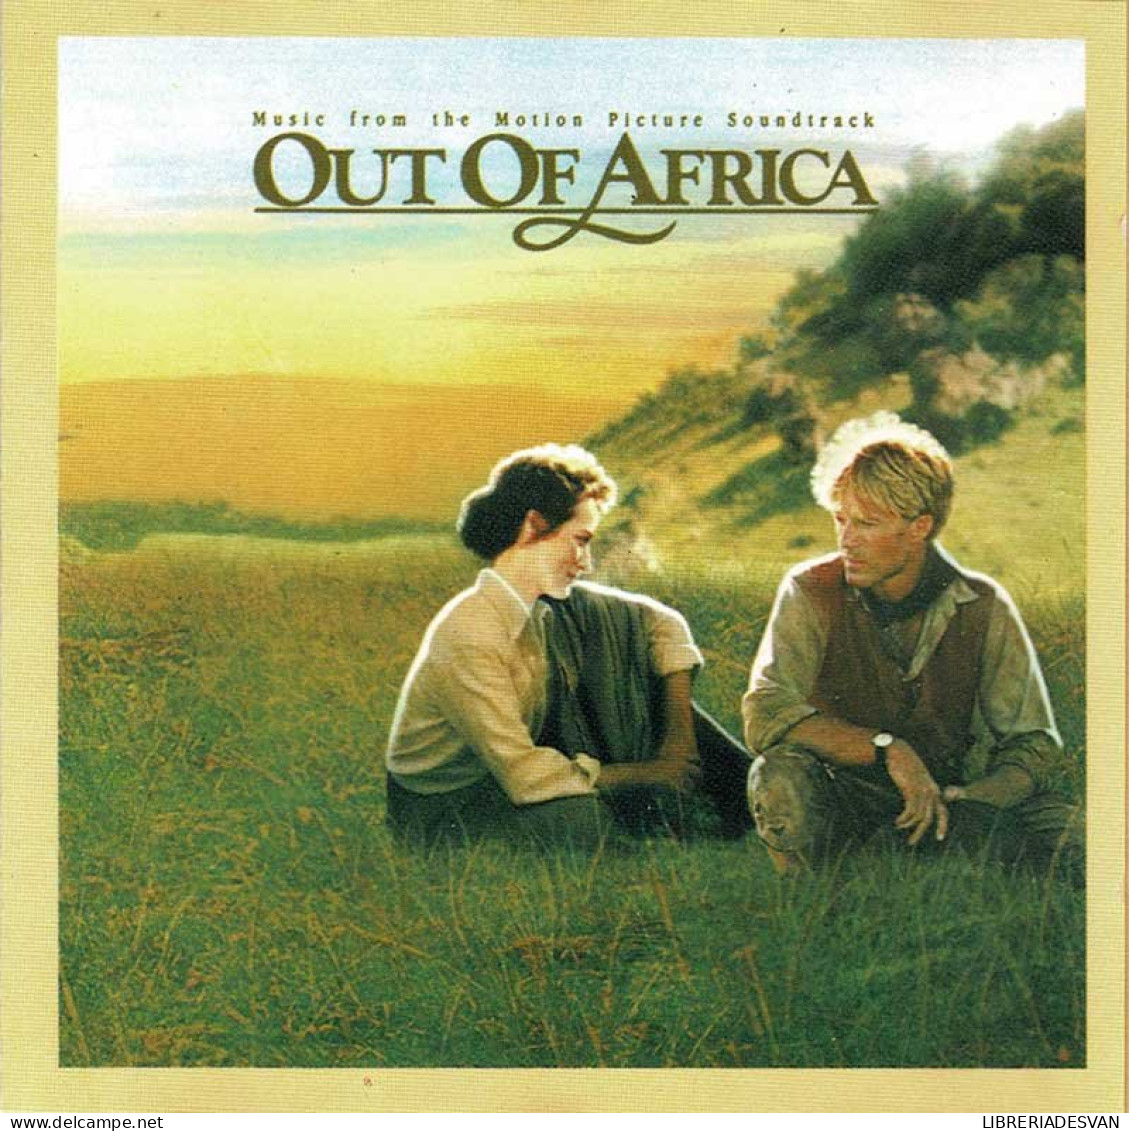 John Barry - Out Of Africa - Memorias De Africa (Music From The Motion Picture Soundtrack). CD - Soundtracks, Film Music